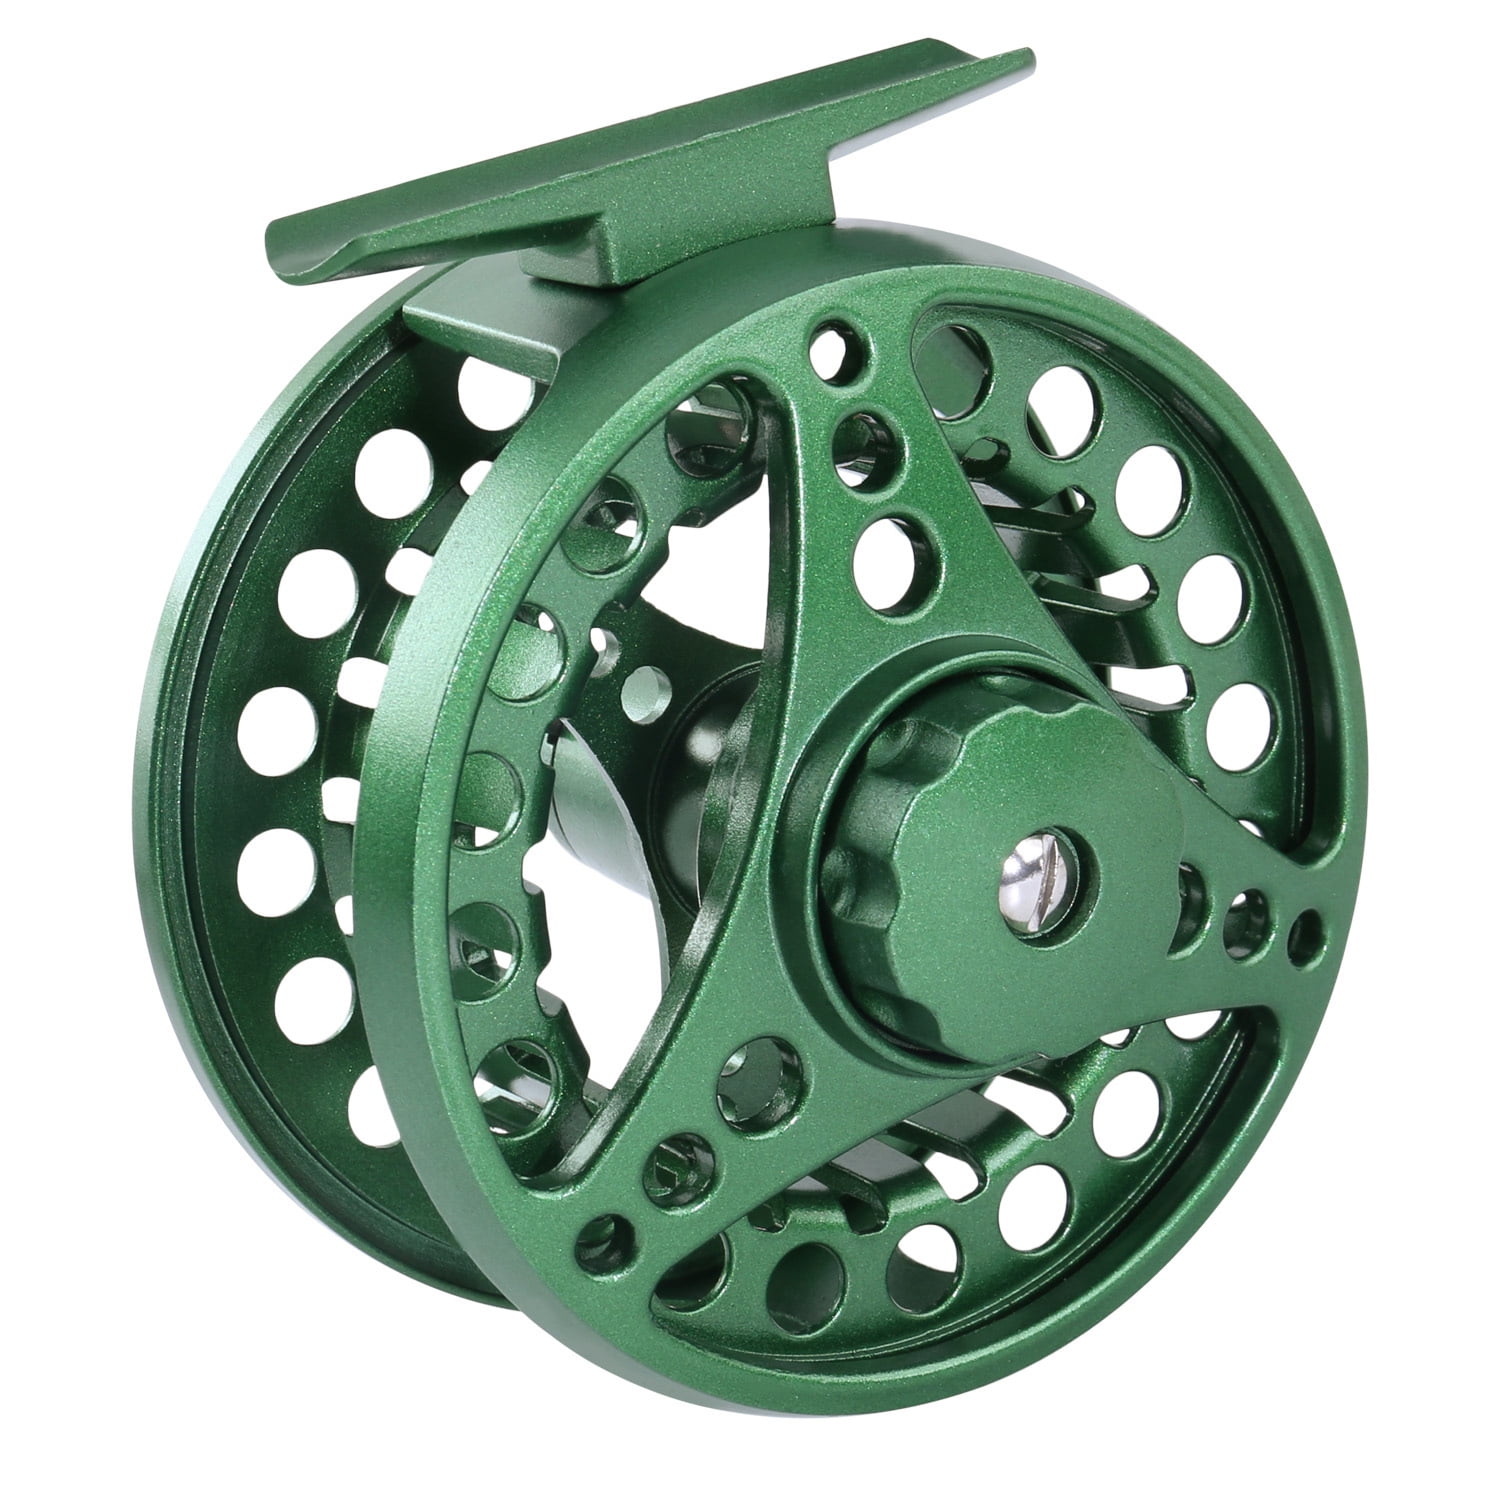 2-1/4 in CNC Machined Aluminum Fly Fishing Reel-4BB,2:1 Multiplier Ice  Fishing